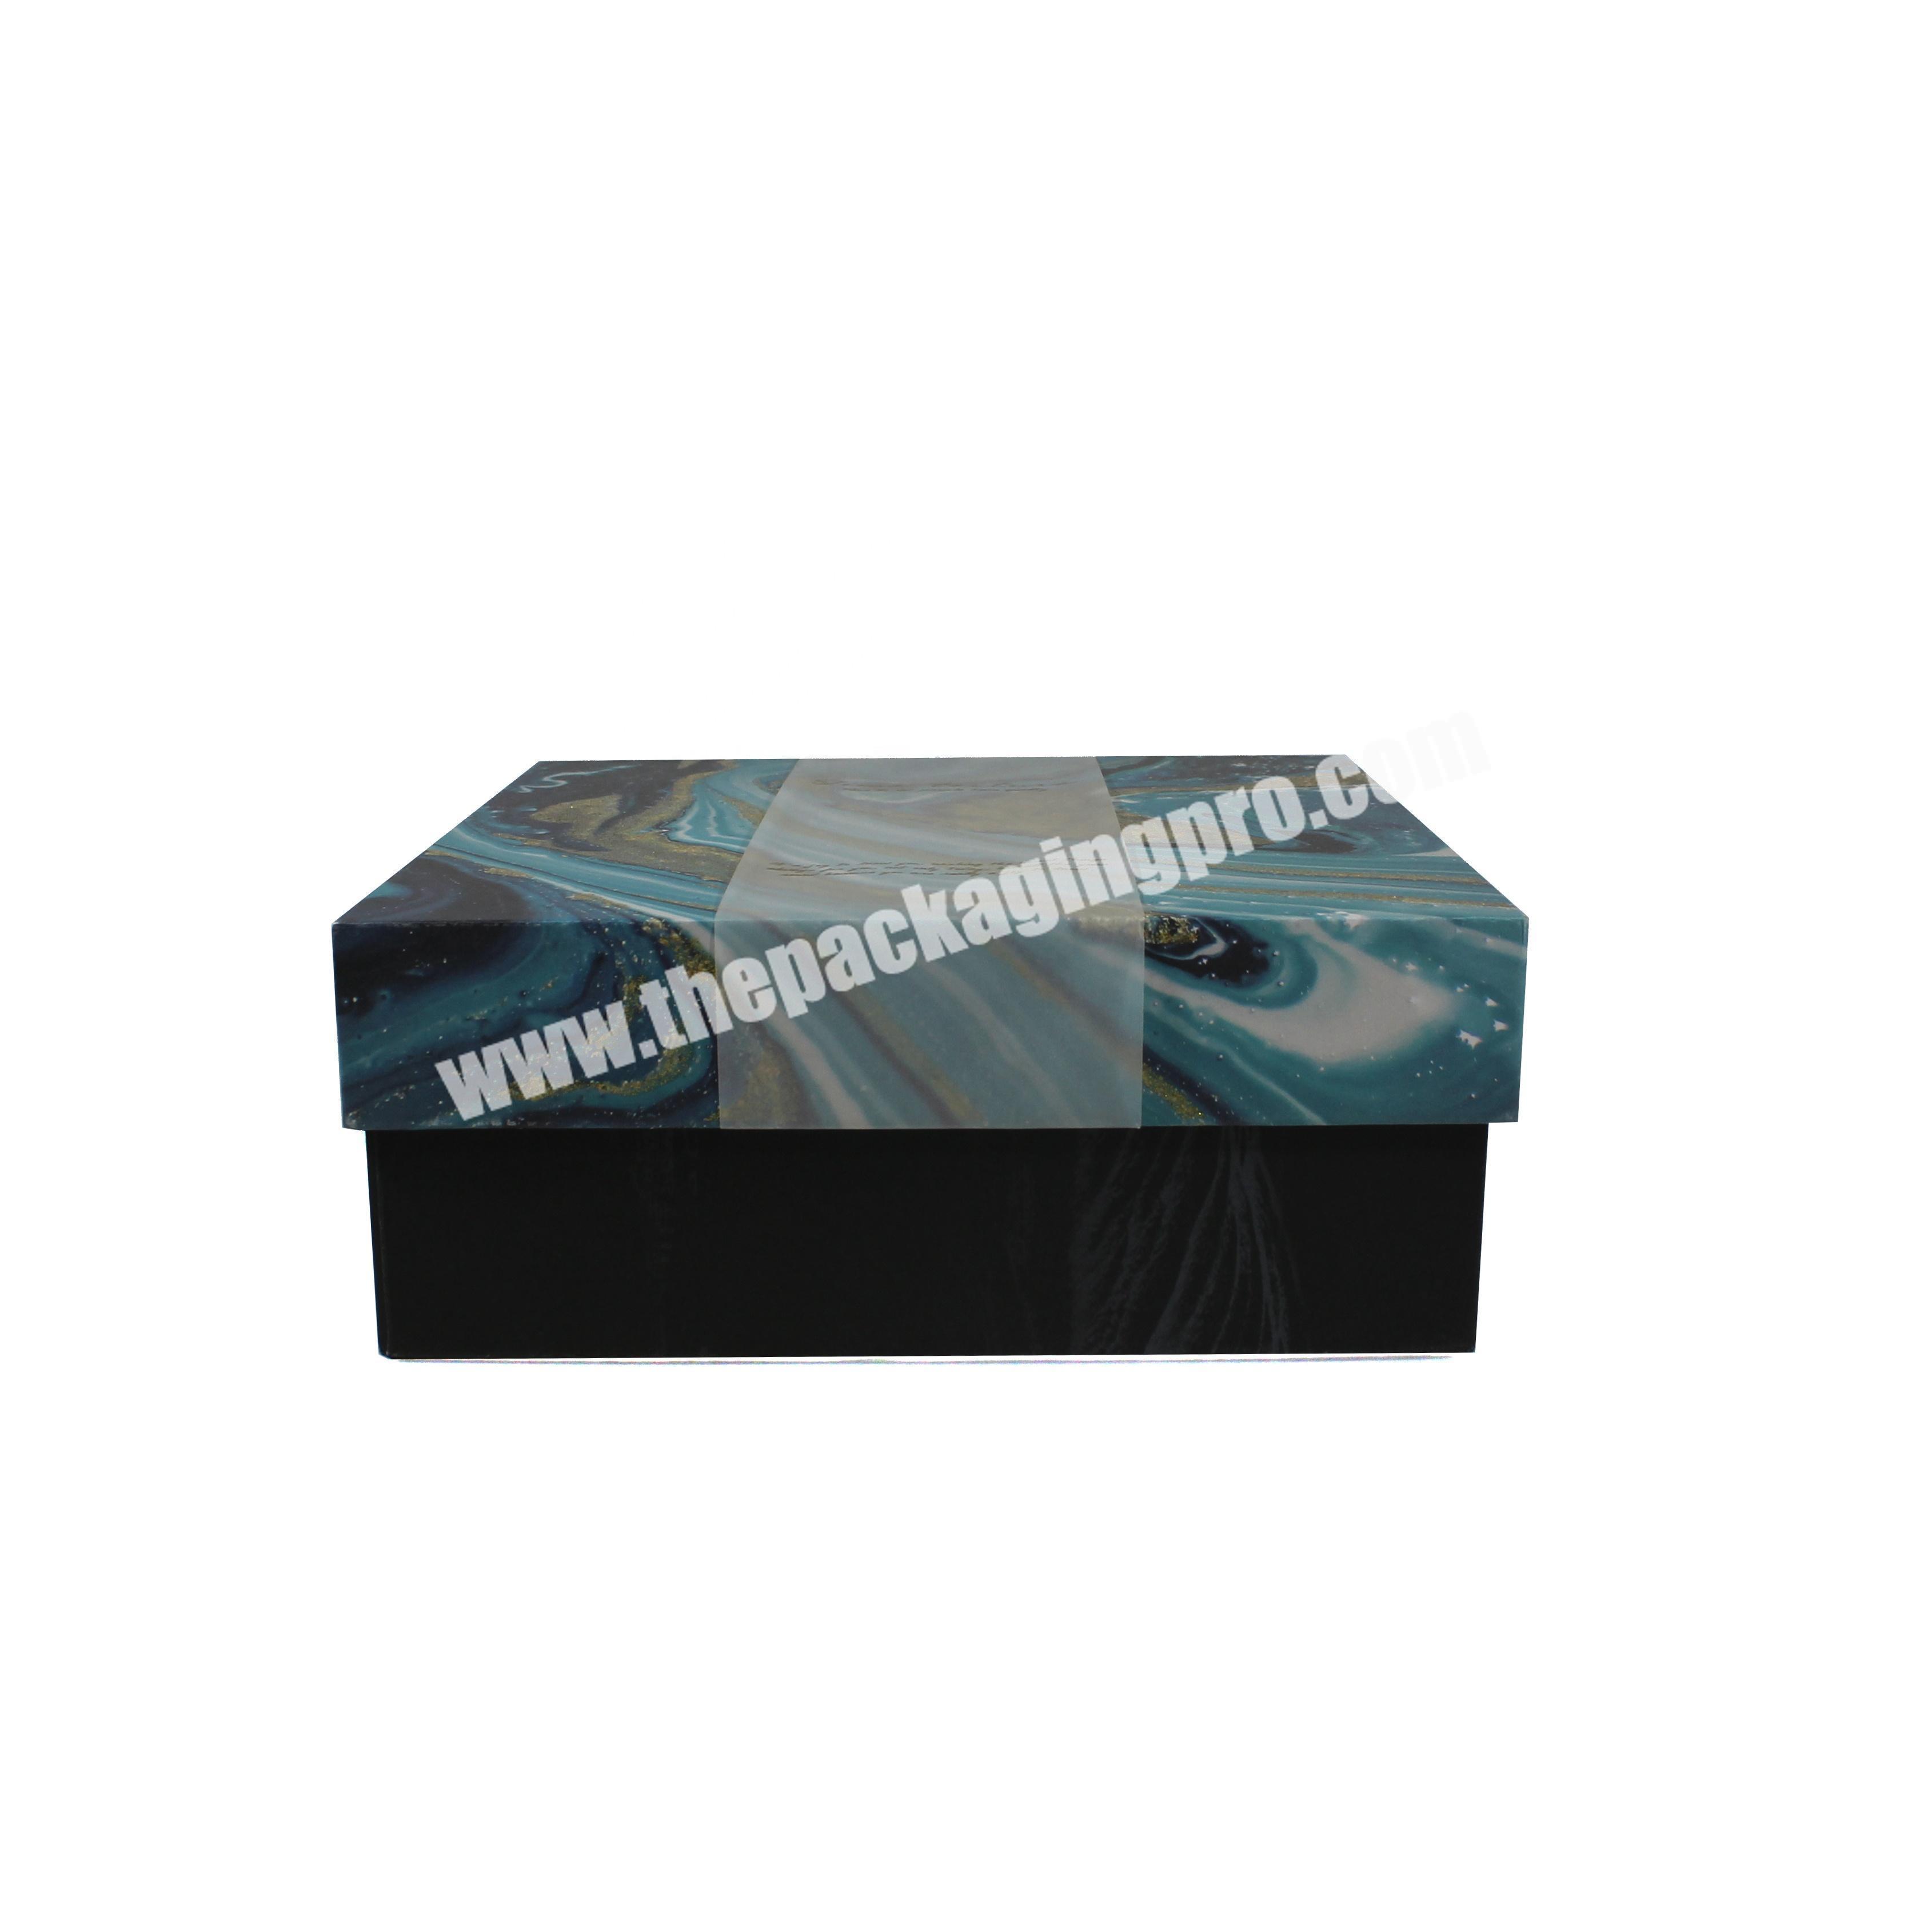 Design New trend cardboard gift box for each company